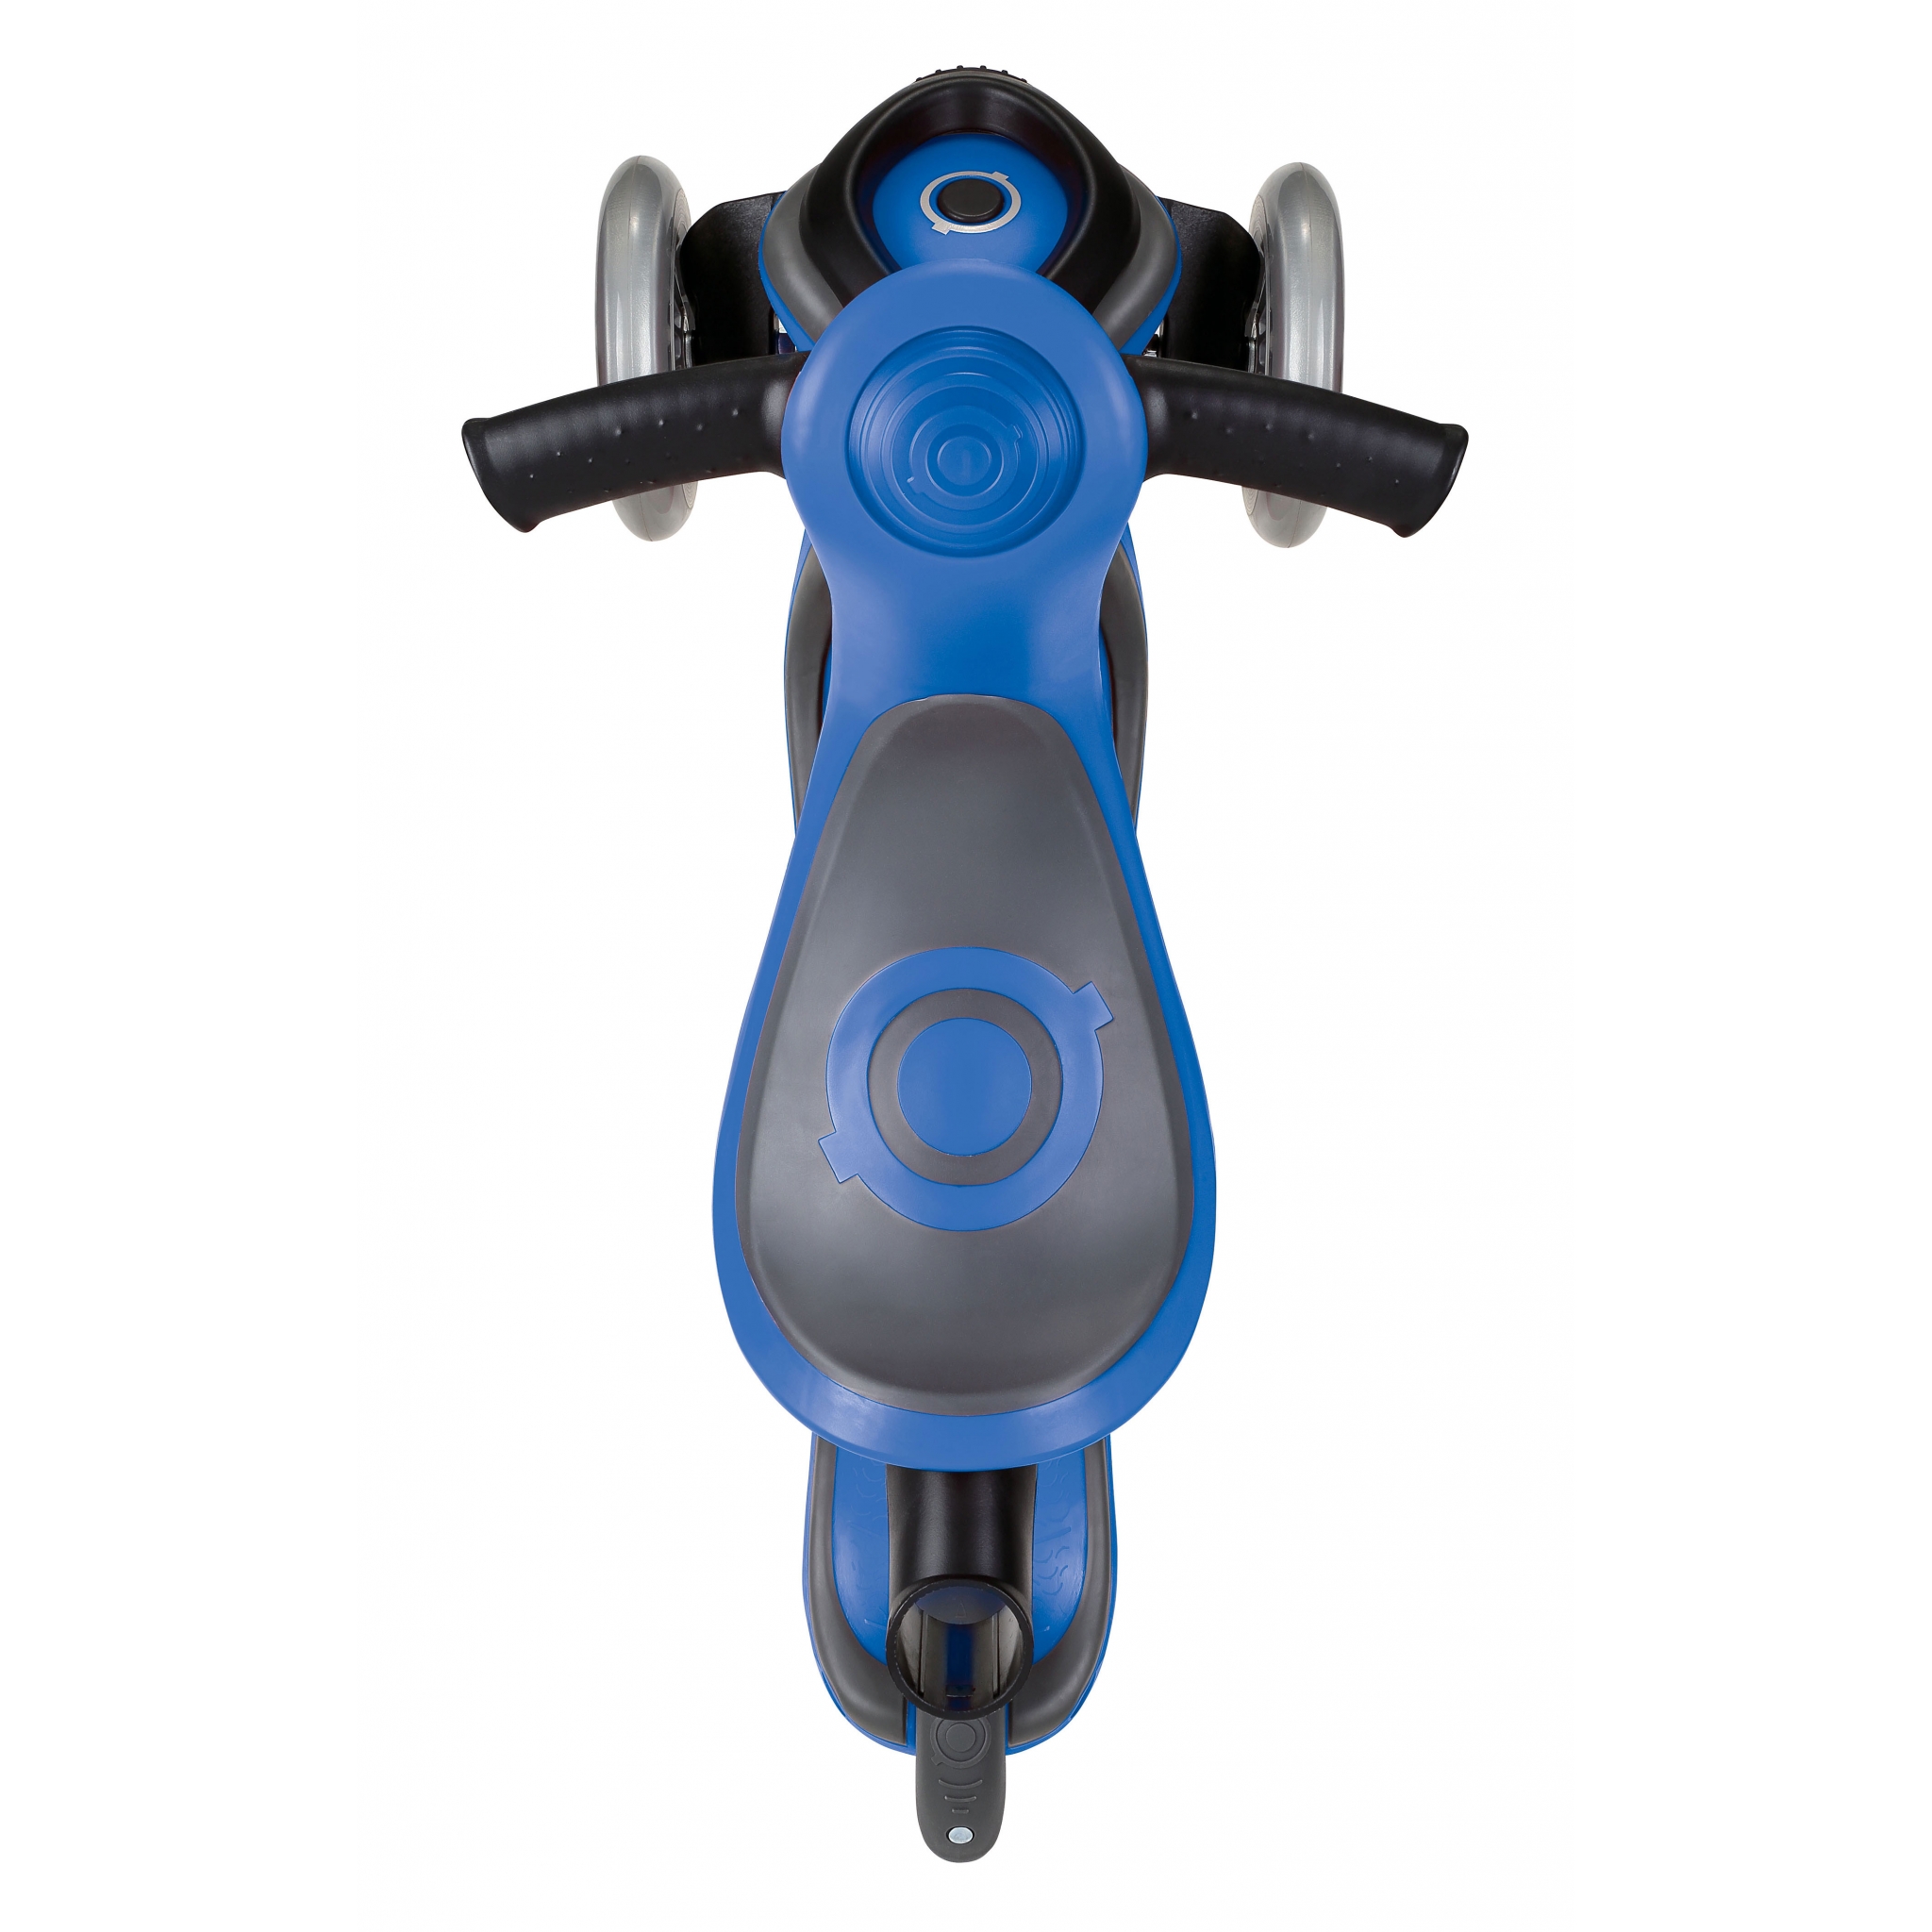 GO-UP-COMFORT-scooter-with-seat-extra-wide-seat-for-maximum-comfort-navy-blue 3